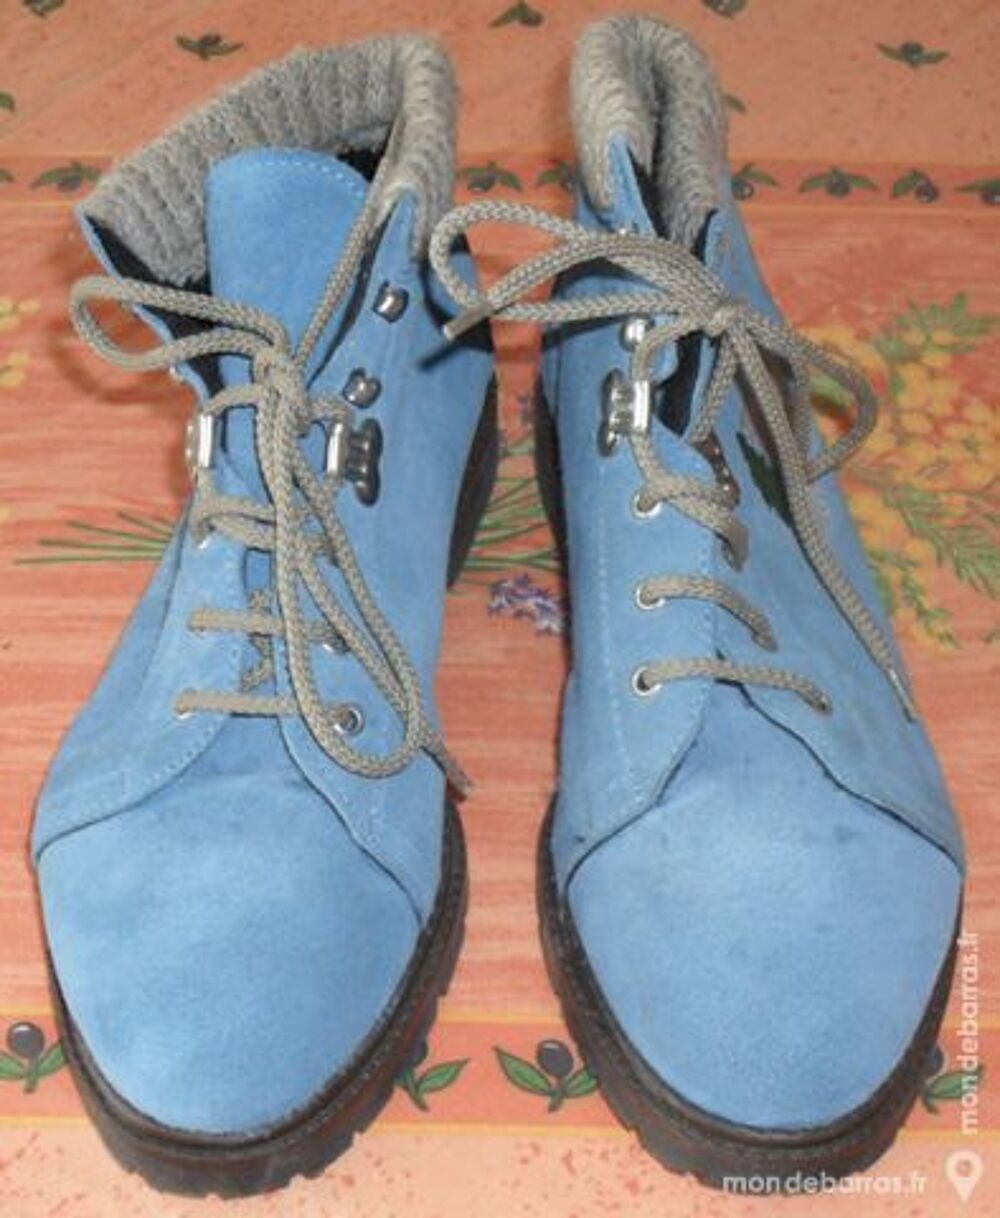 Chaussures montantes bleues taille 39 Chaussures